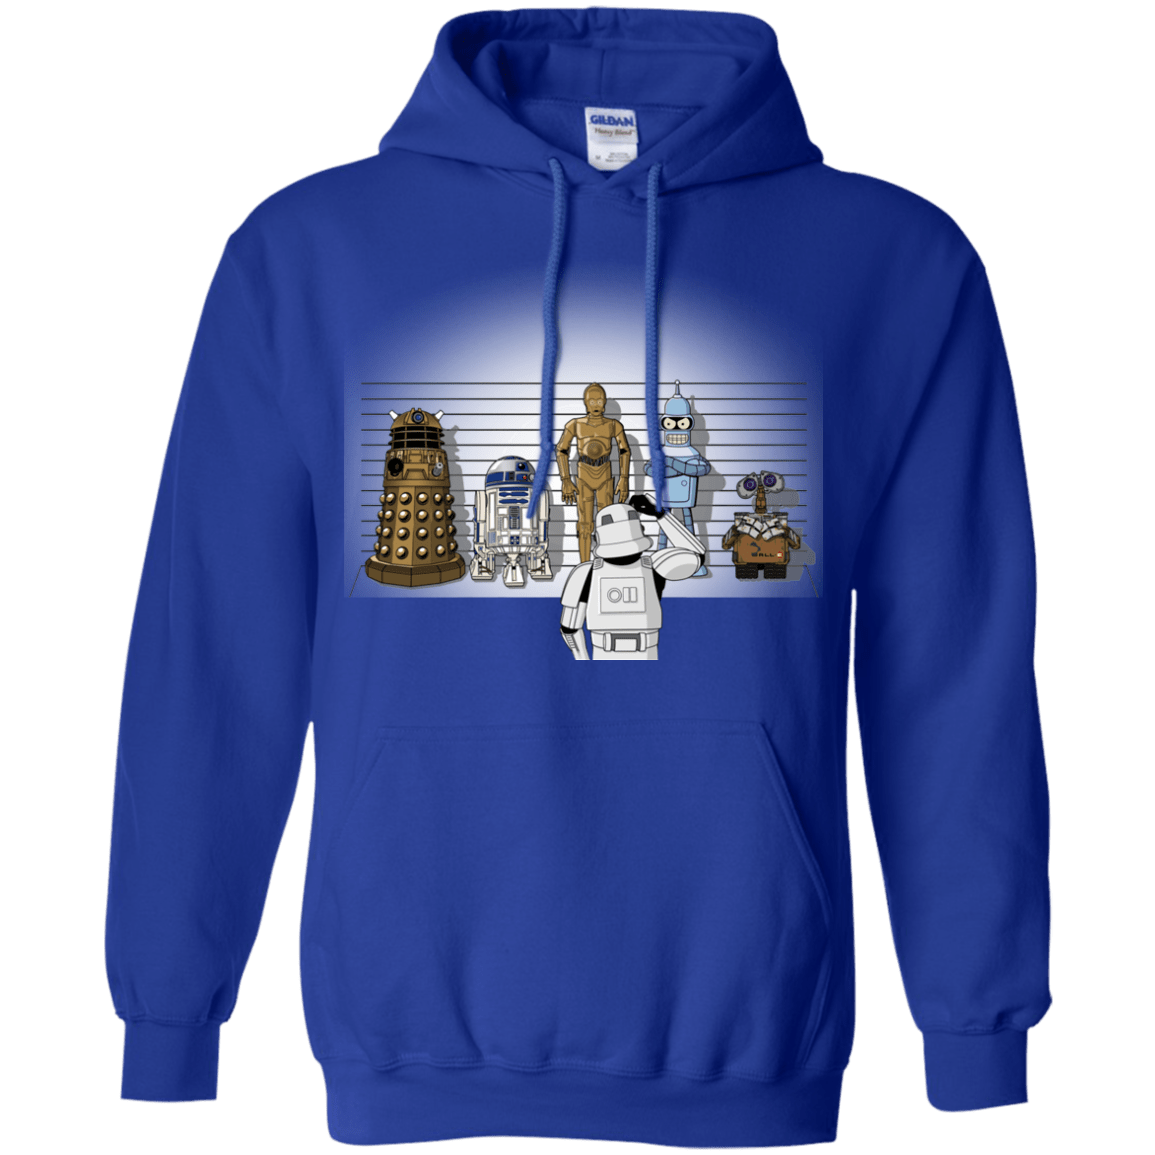 Sweatshirts Royal / Small Are These Droids Pullover Hoodie